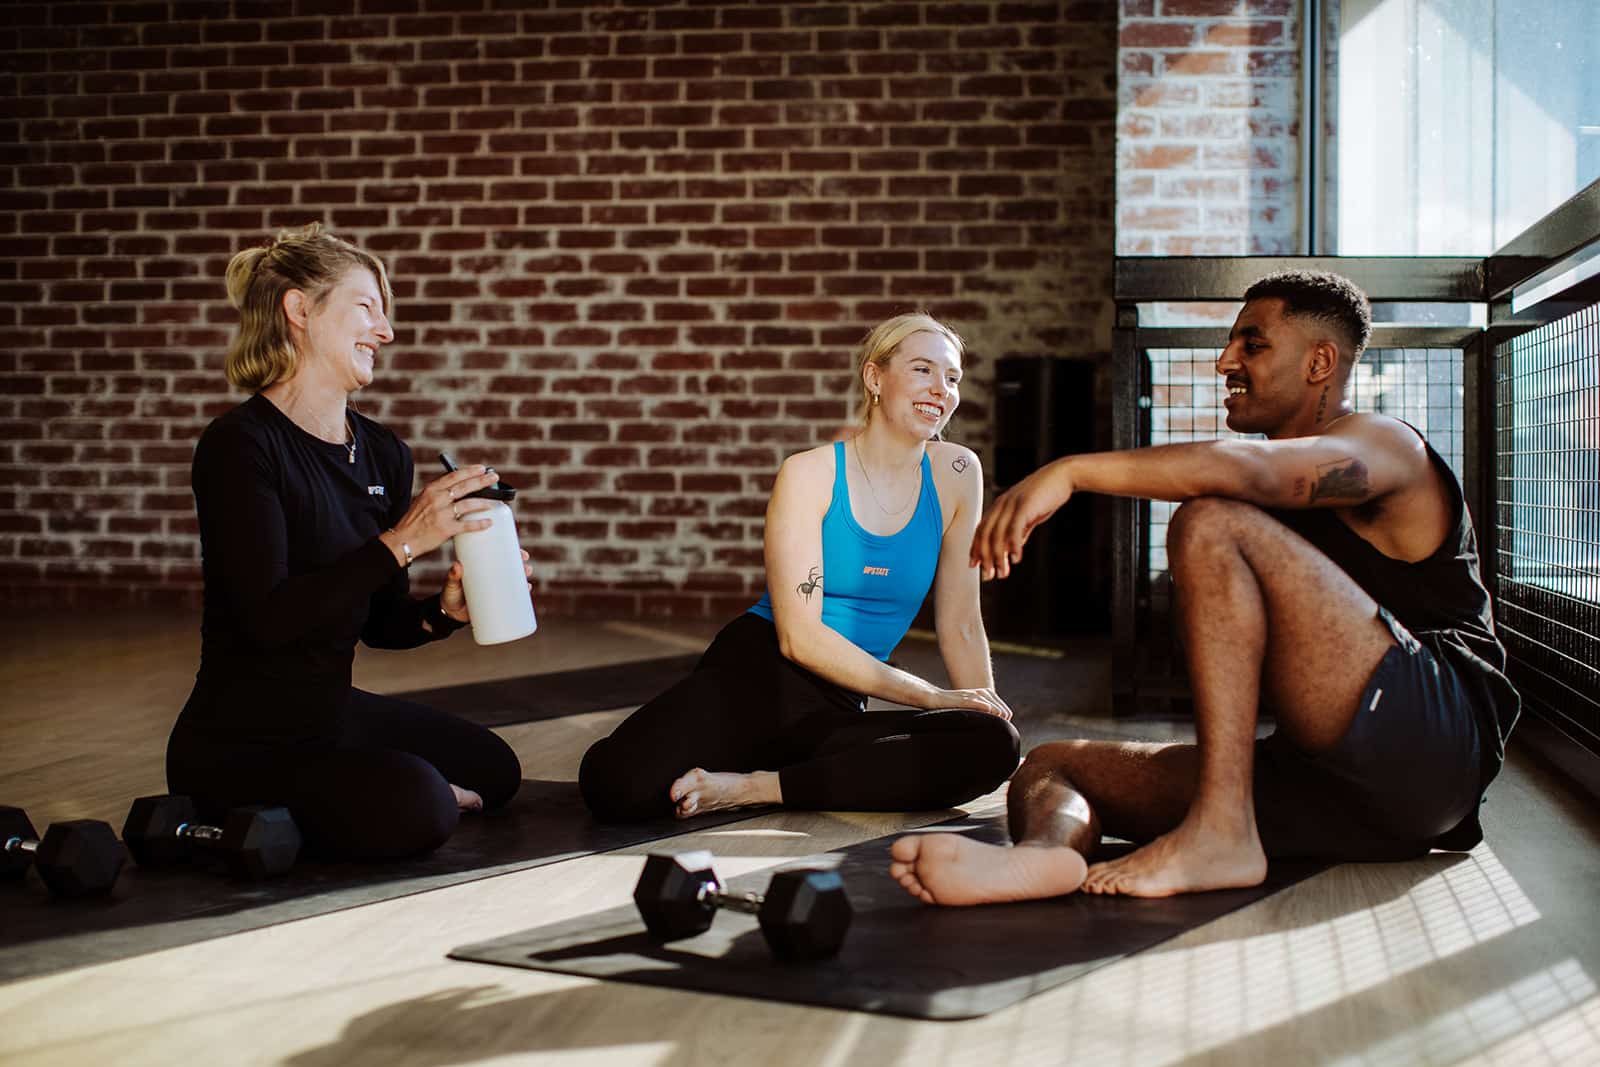 Bring a friend free perk. Smiling Upstaters relax in the heated mat room at Fitzroy Studio.